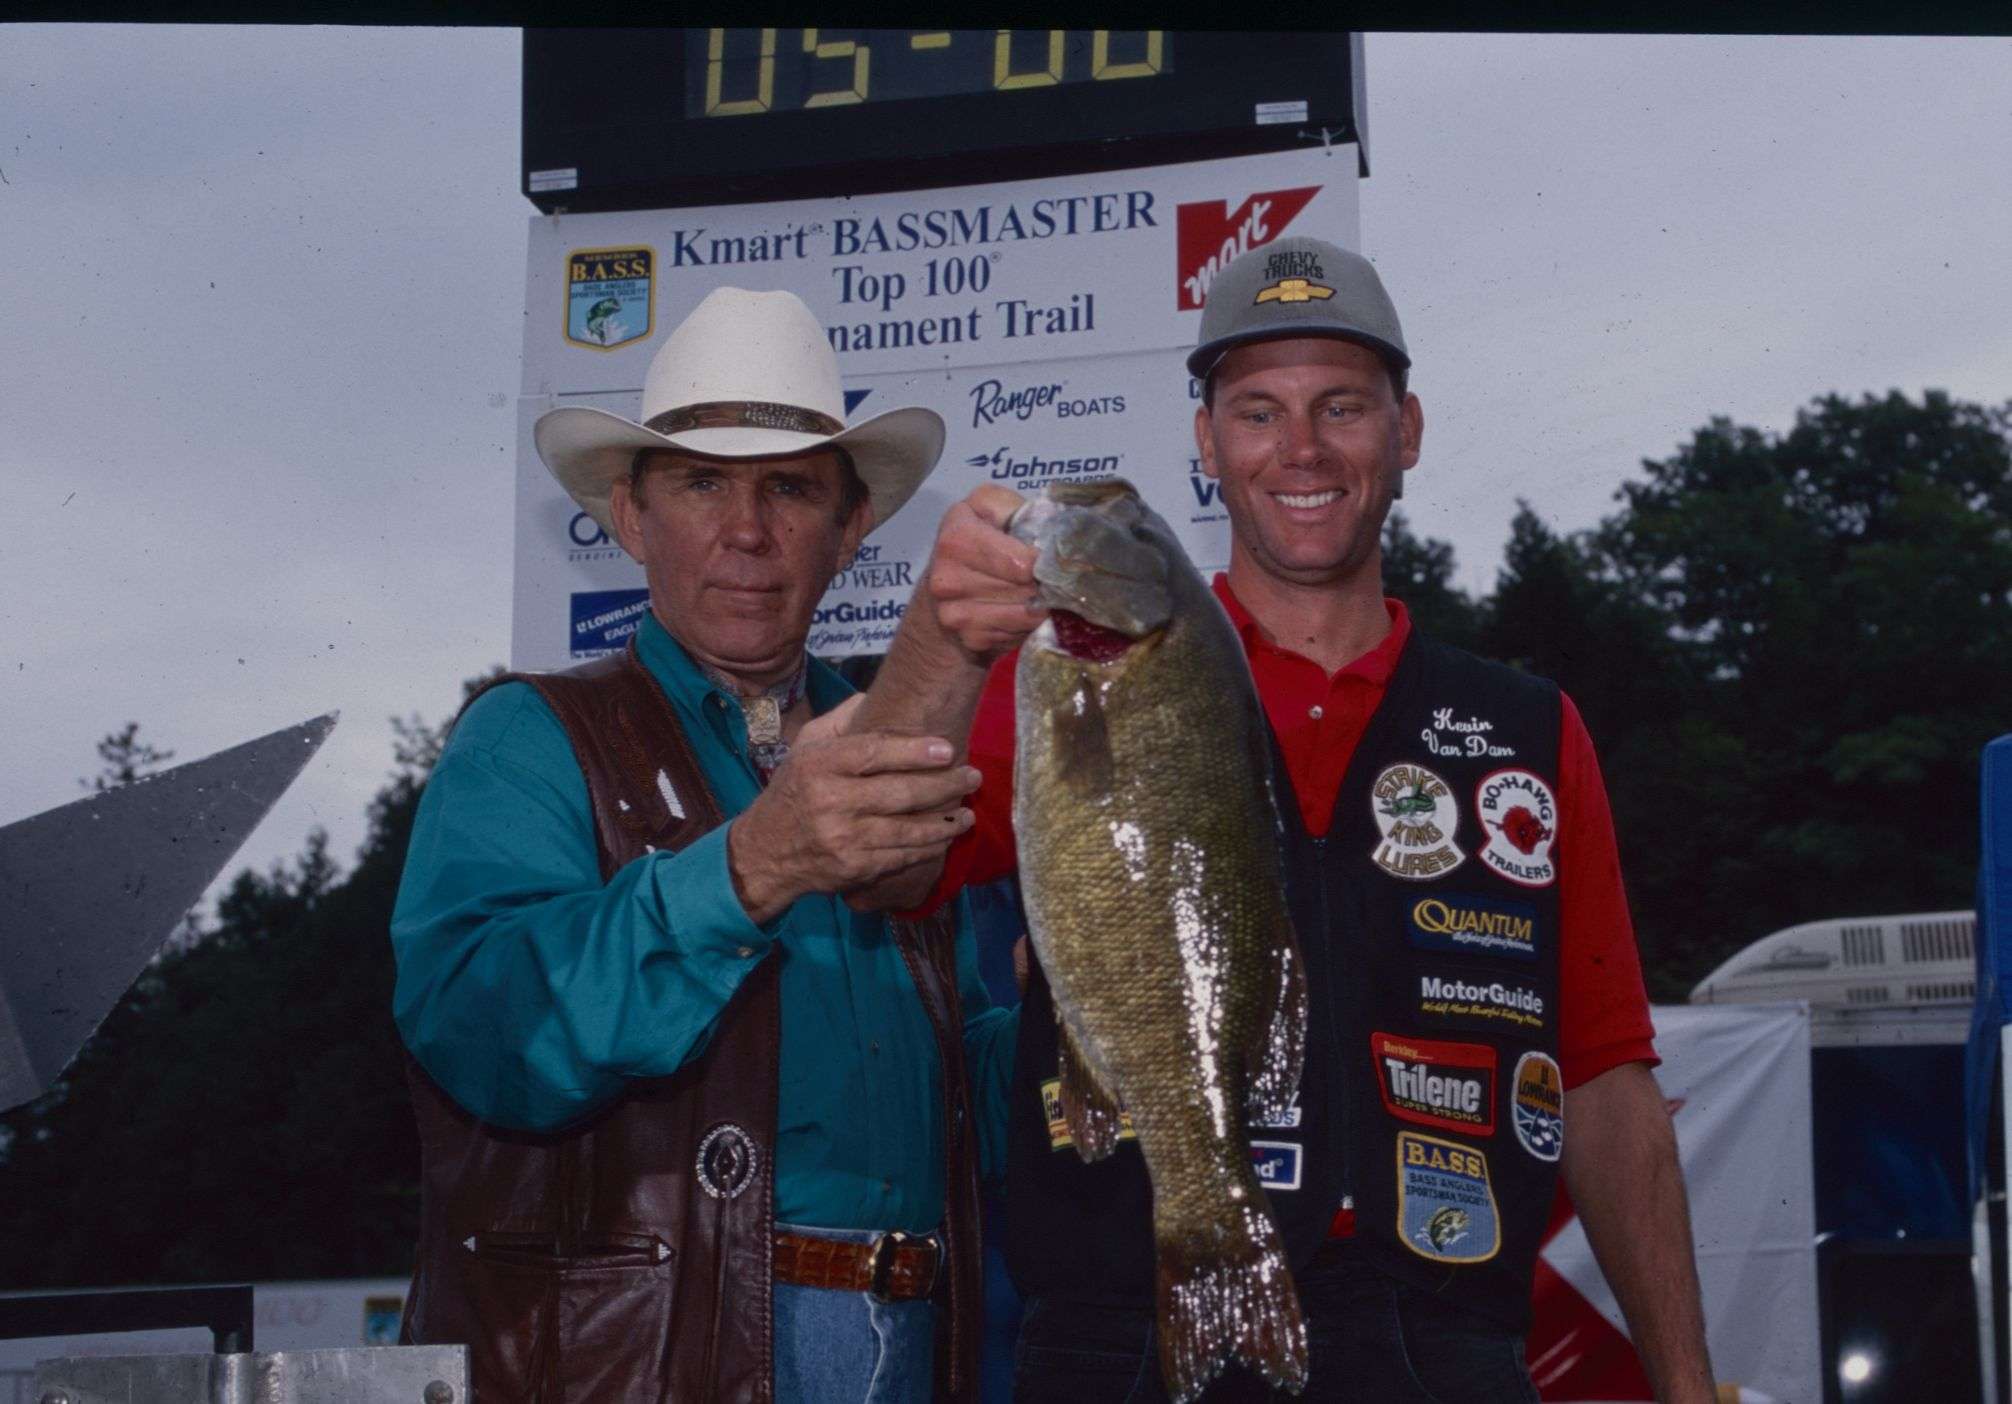 A year after winning his second Angler of the Year title, Kevin VanDam won two tournaments in 1997. Here he and Ray Scott show off a big catch at the 1997 Alabama Bassmaster Top 100. KVD placed 40th at this tournament.